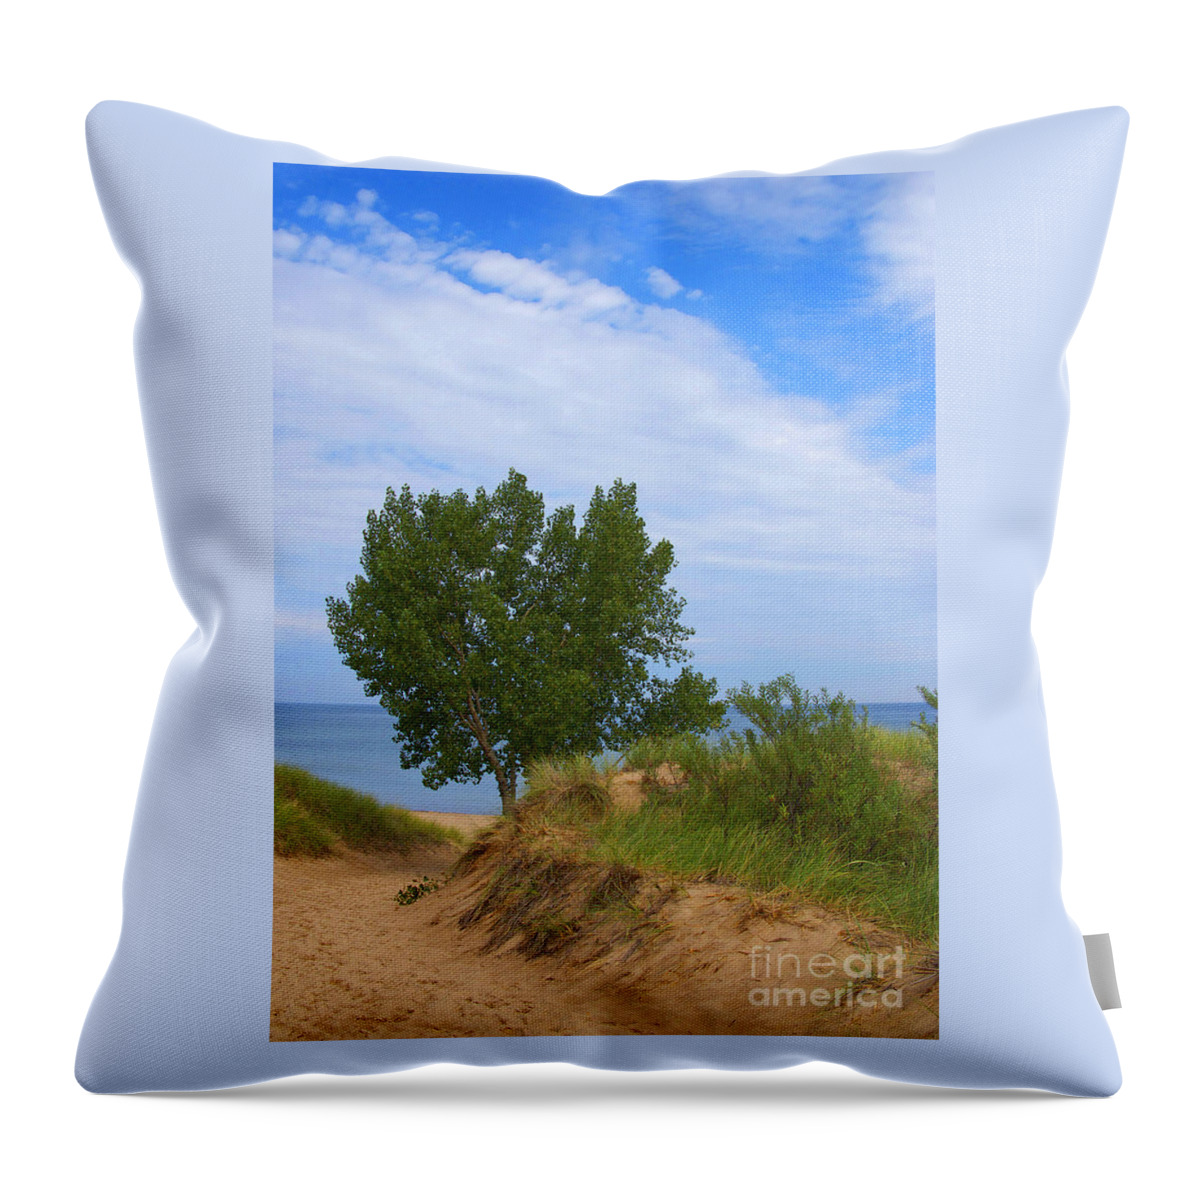 Dune Throw Pillow featuring the photograph Indiana Dunes National Park by Ann Horn